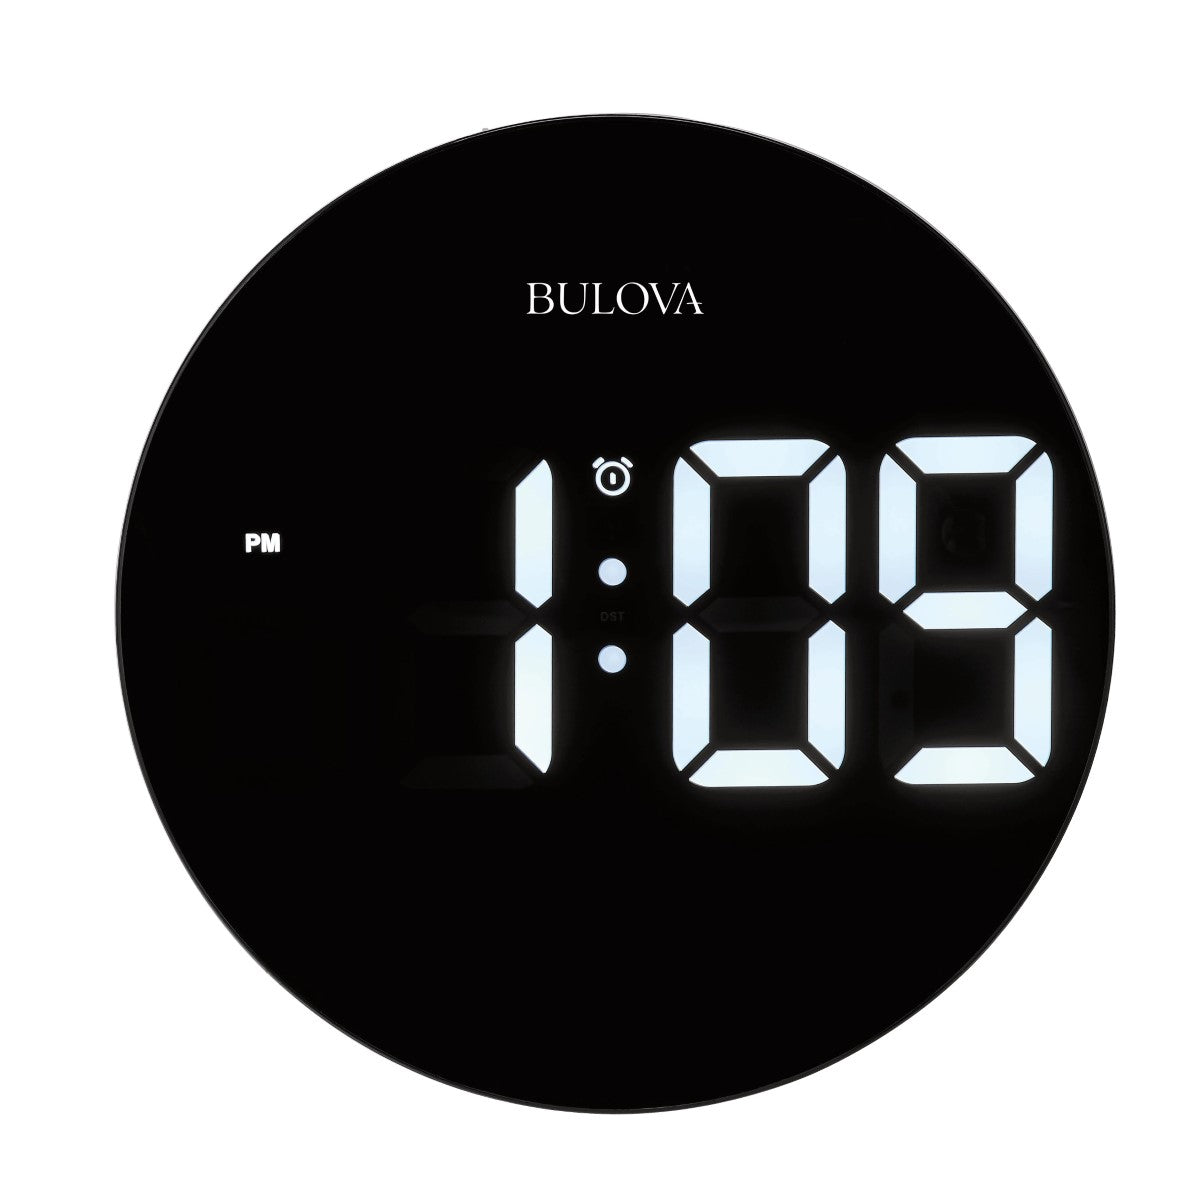 Bulova B1376 Clearview Weather LED Tabletop Wall Alarm Clock